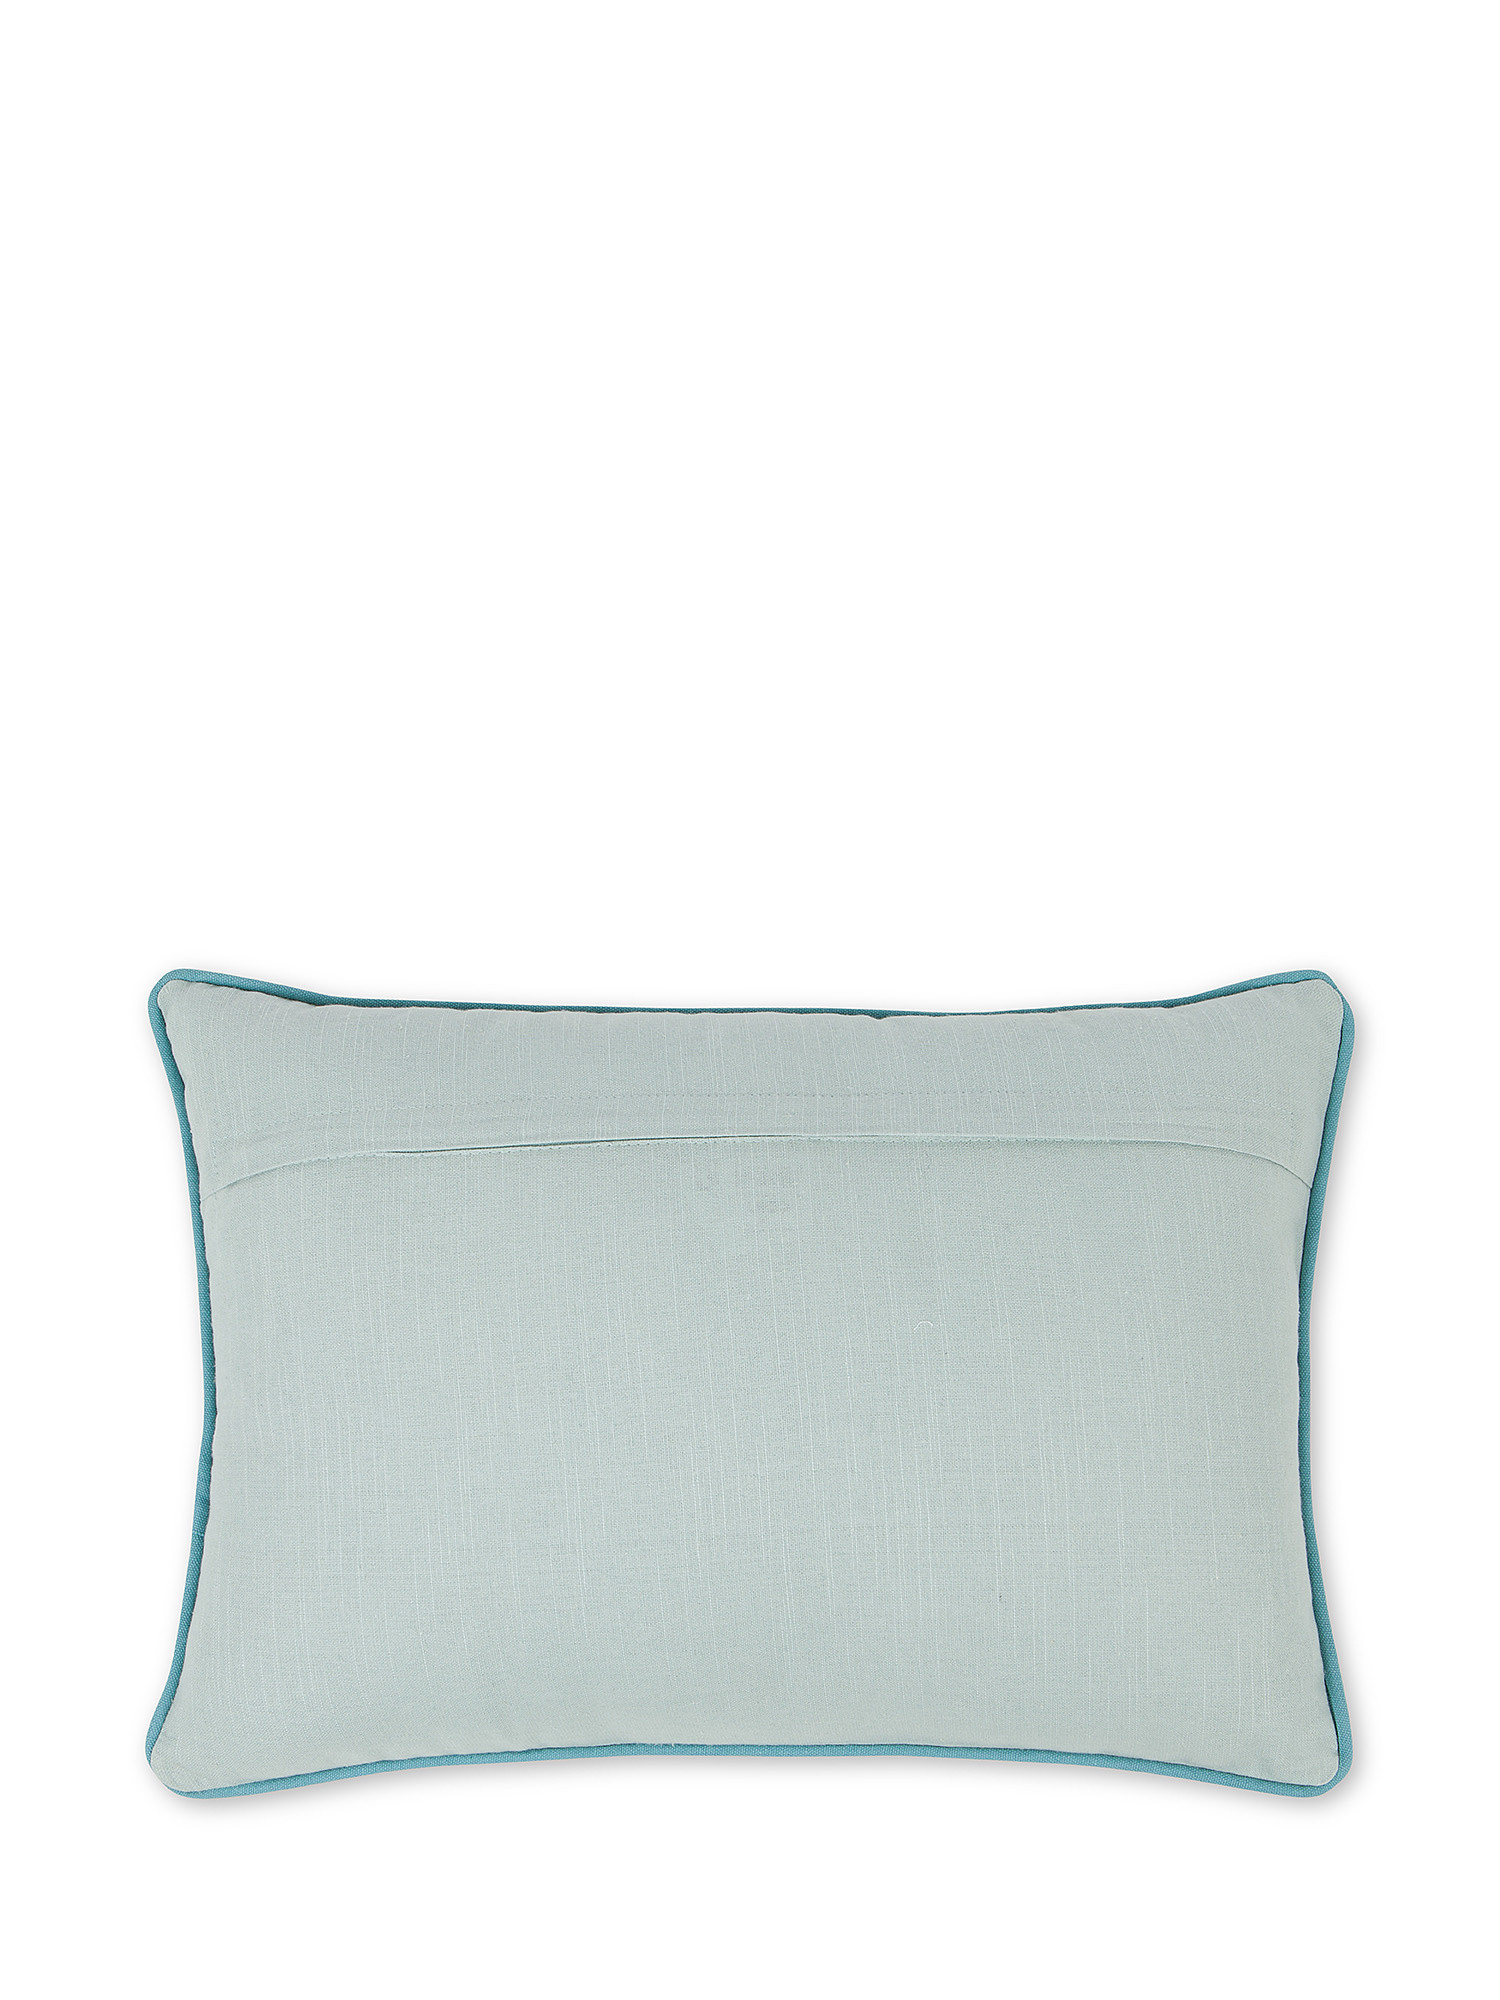 35X50 cm cushion with applications and embroidery, Light Blue, large image number 1